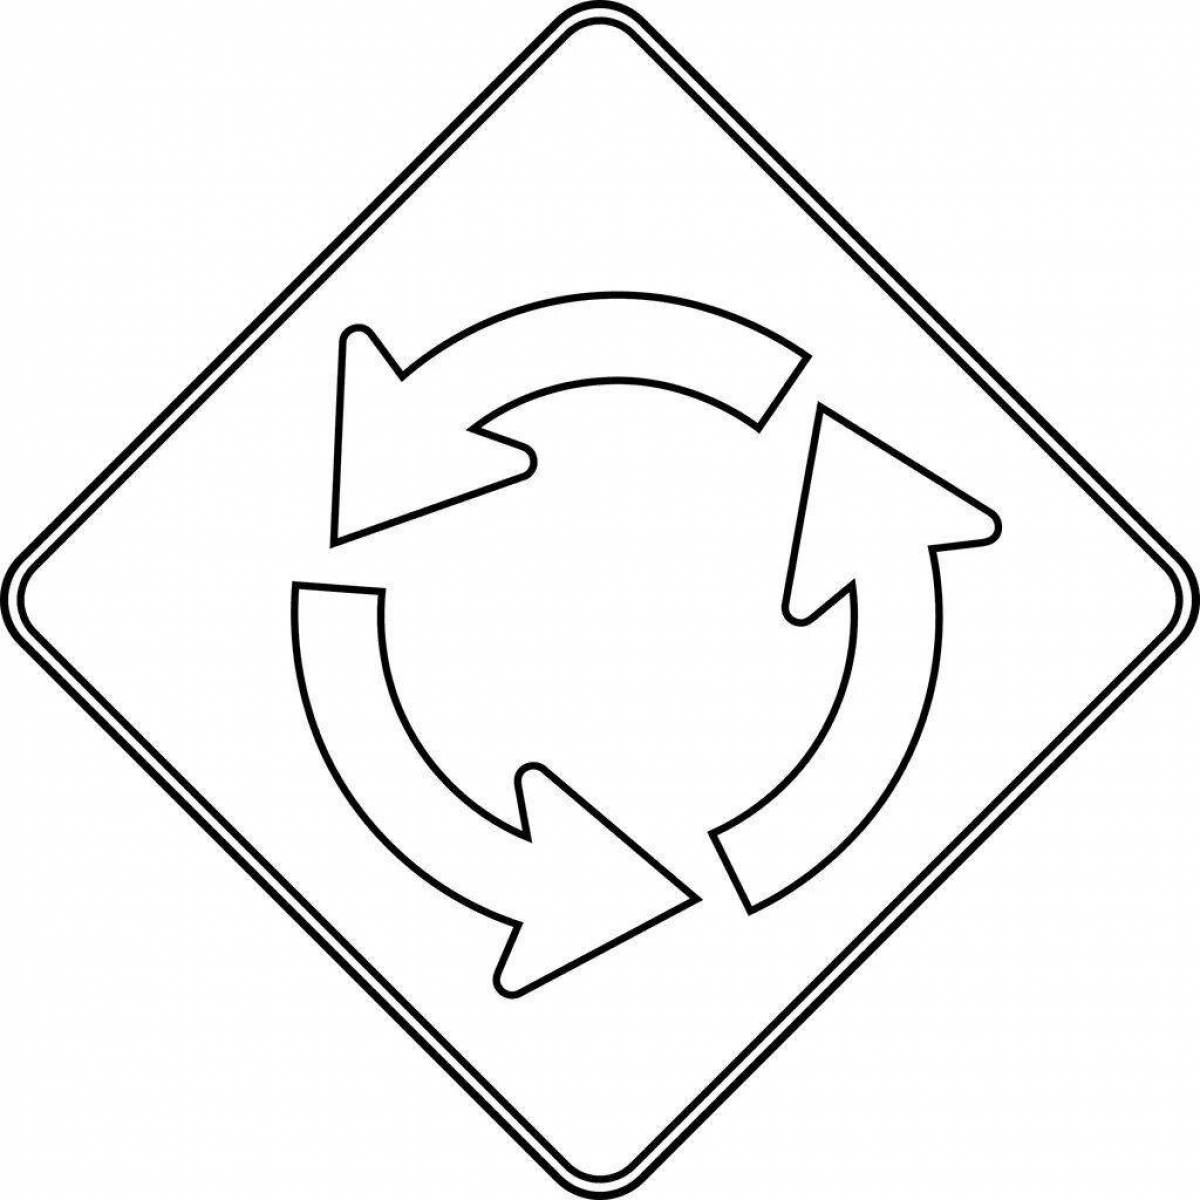 Parking Road Sign Coloring Page